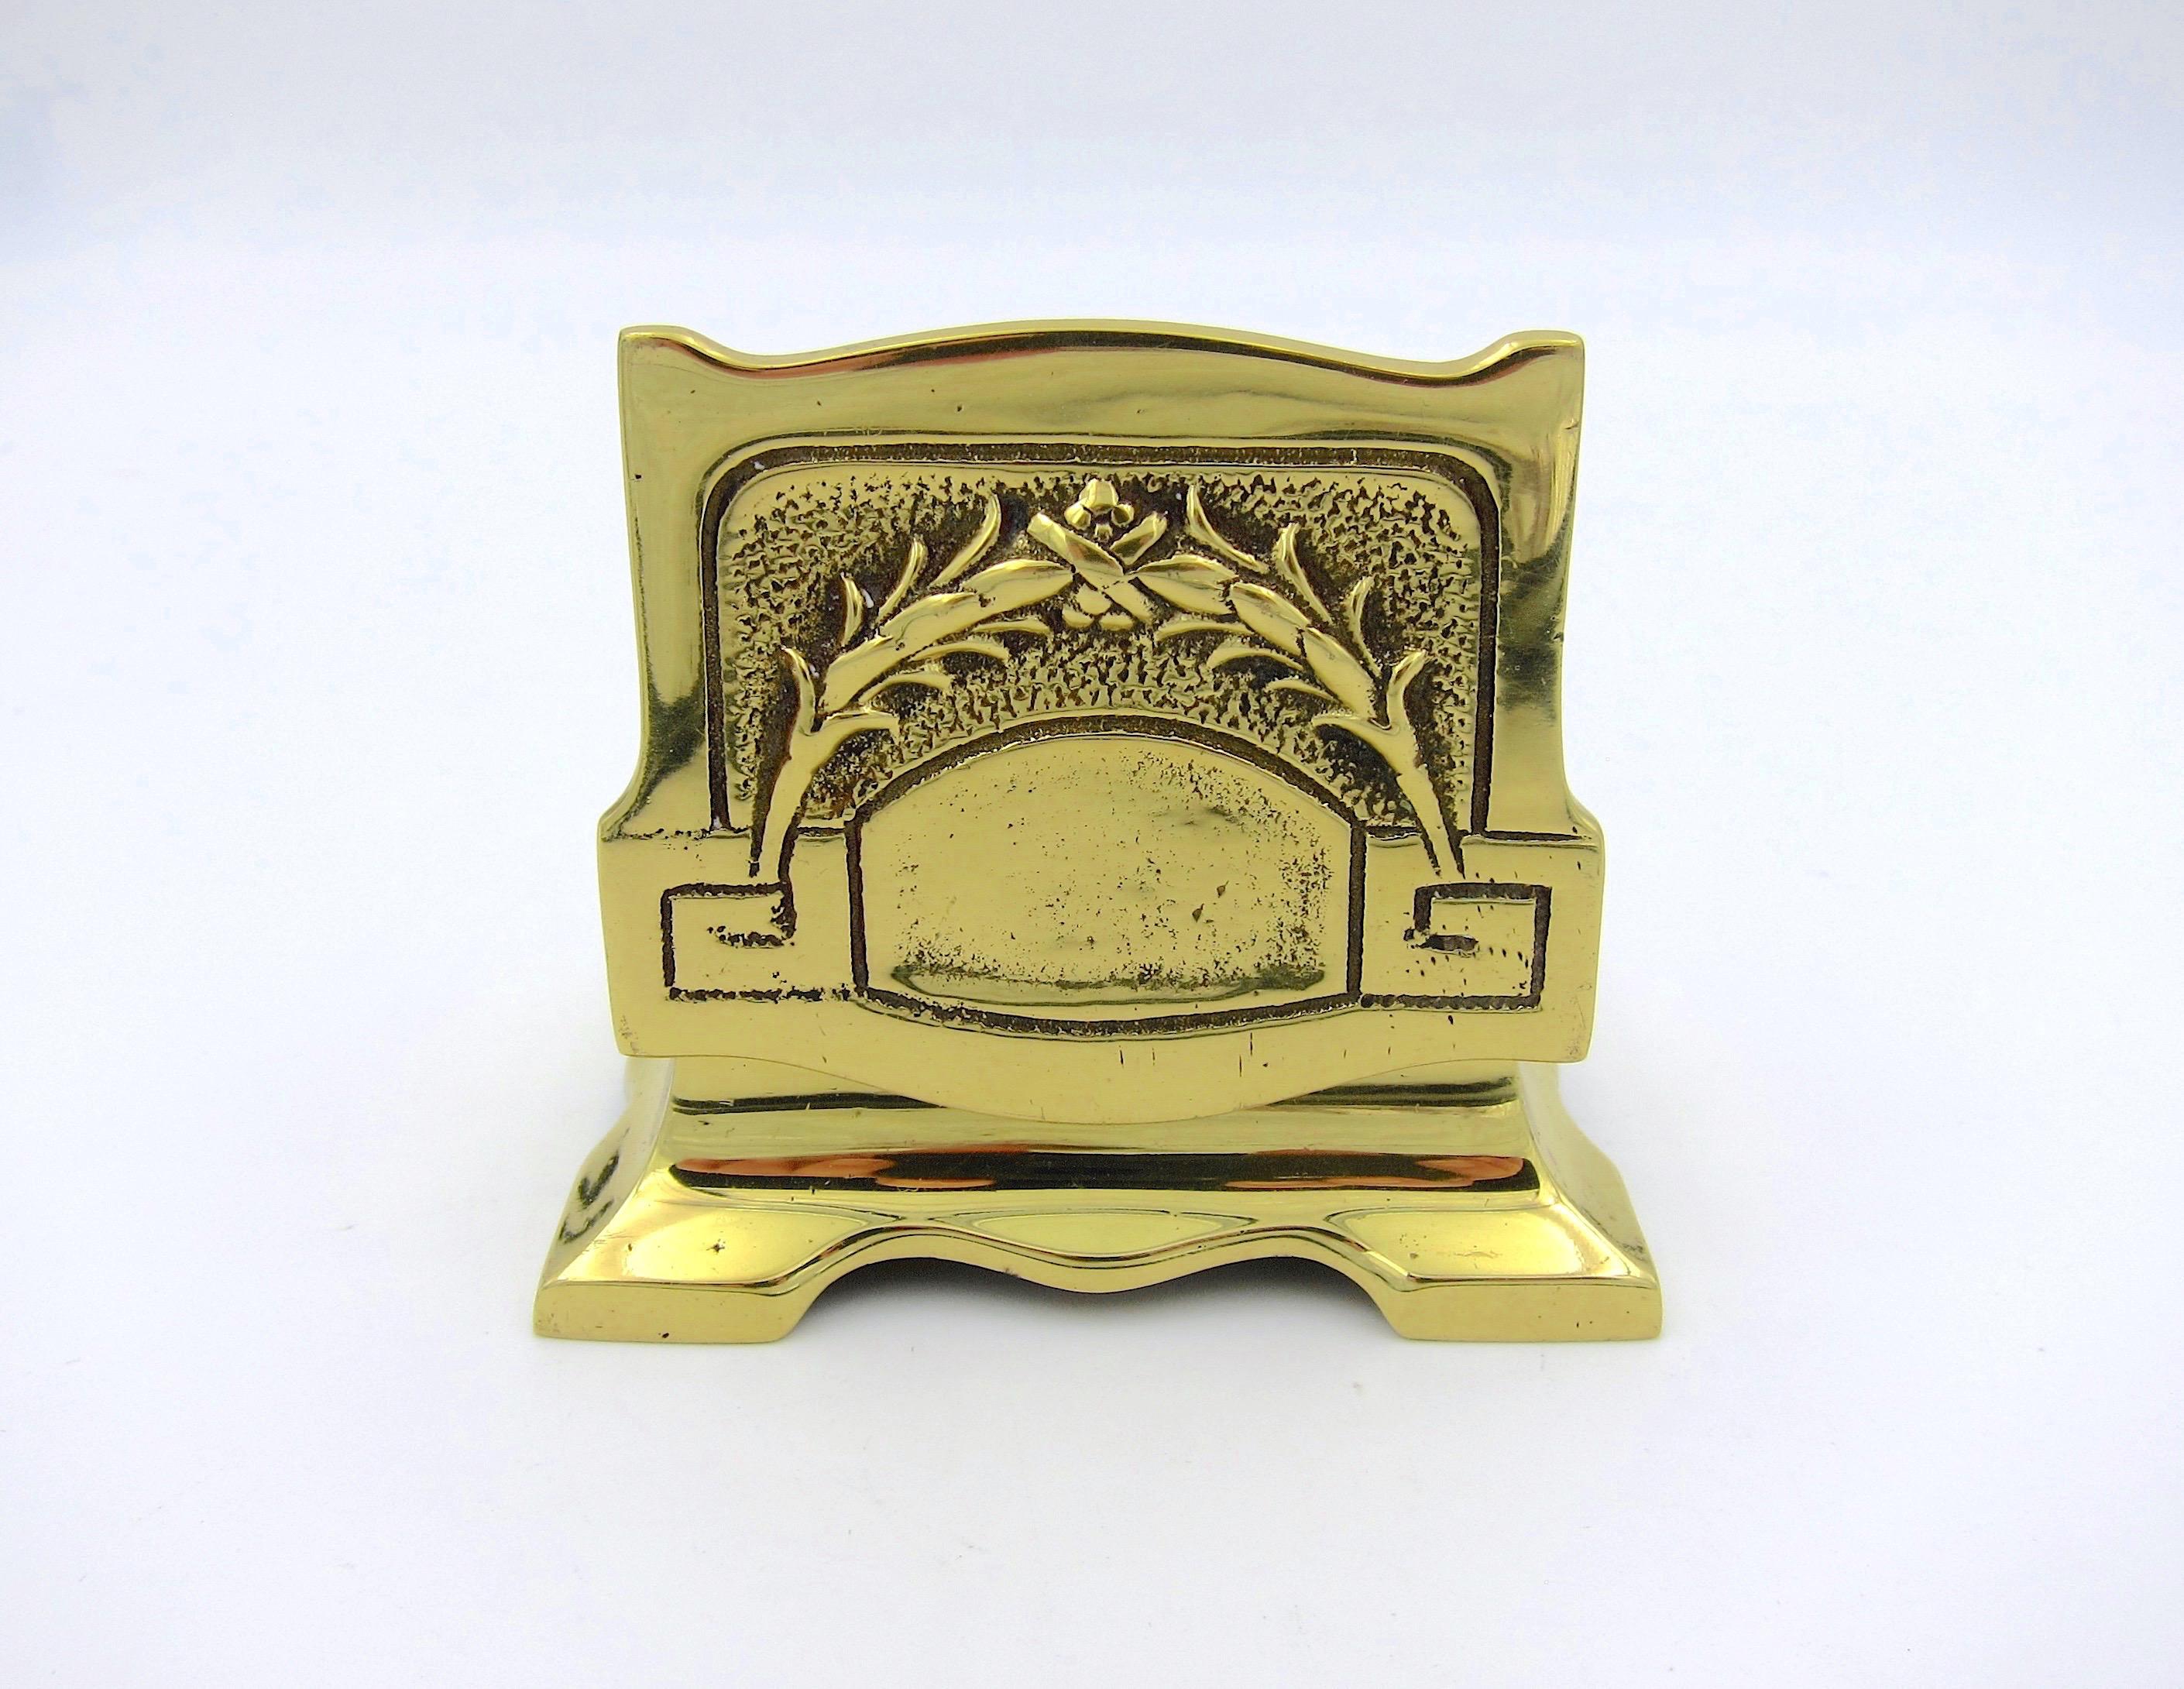 A vintage double stamp box in solid cast brass, designed with a neoclassical garland and Greek key motifs decorating the hinged lid. The small desk accessory has two slanted interior compartments for postage stamps, but the design would make an